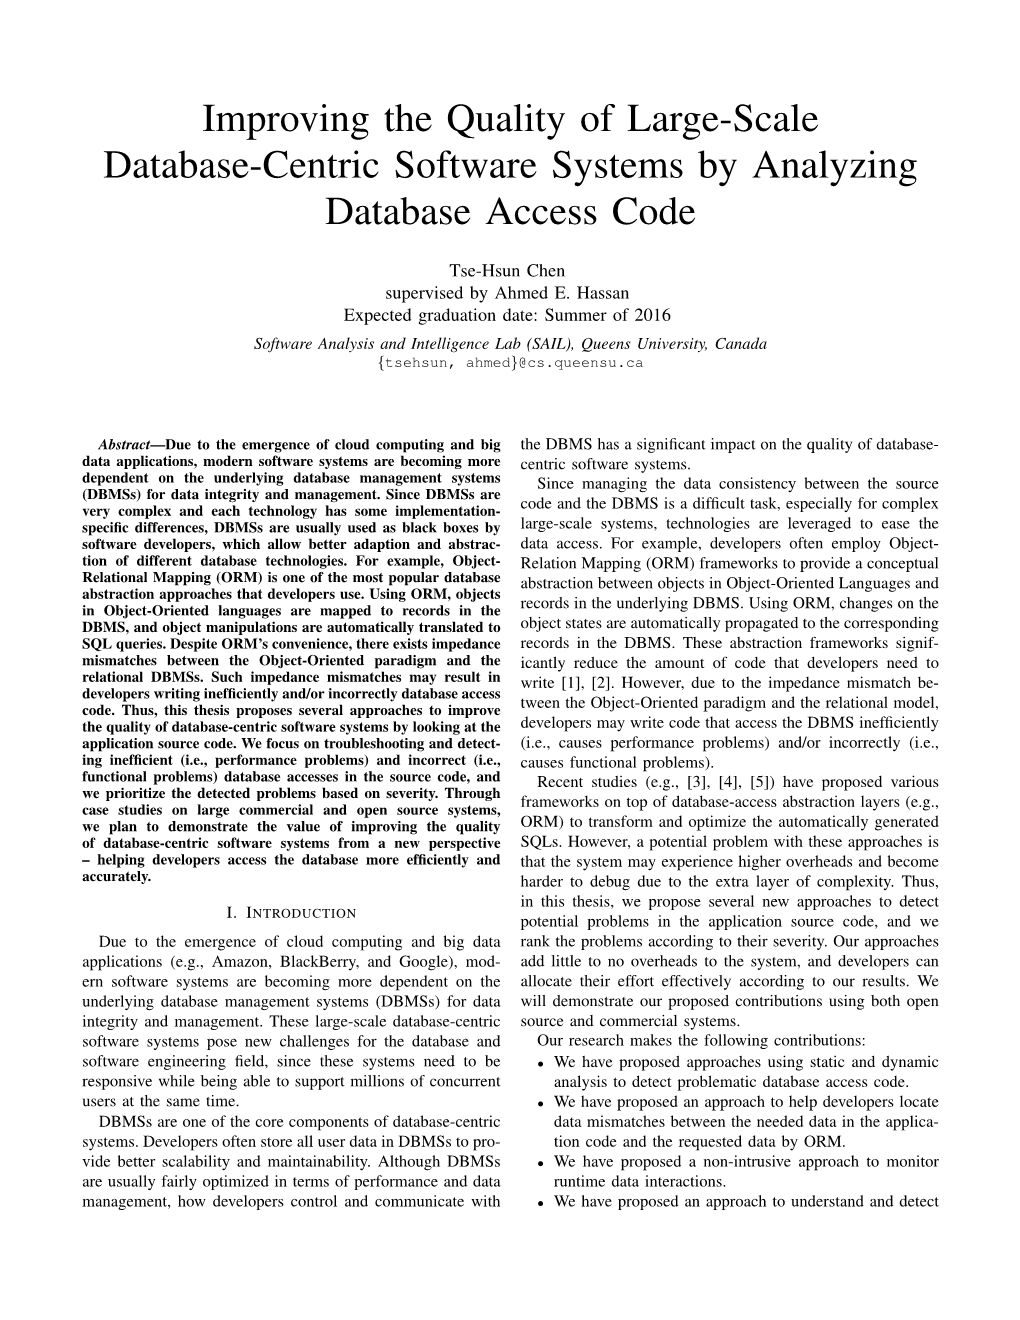 Improving the Quality of Large-Scale Database-Centric Software Systems by Analyzing Database Access Code